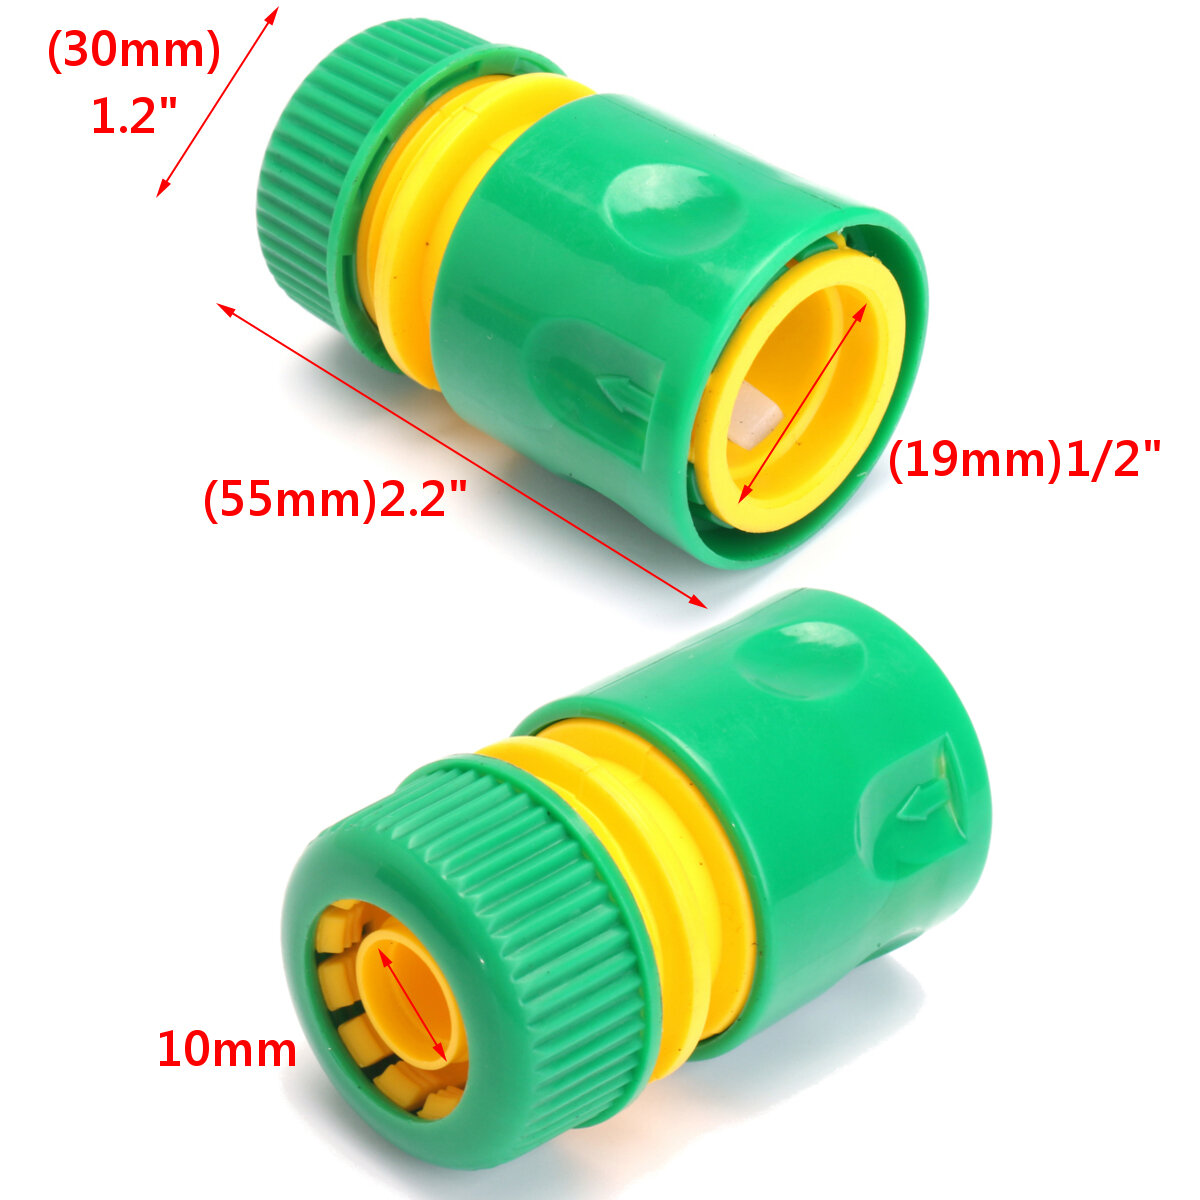 2pcs Garden Tap Water Hose Pipe Connector Quick Connect CL Watering M9B1 